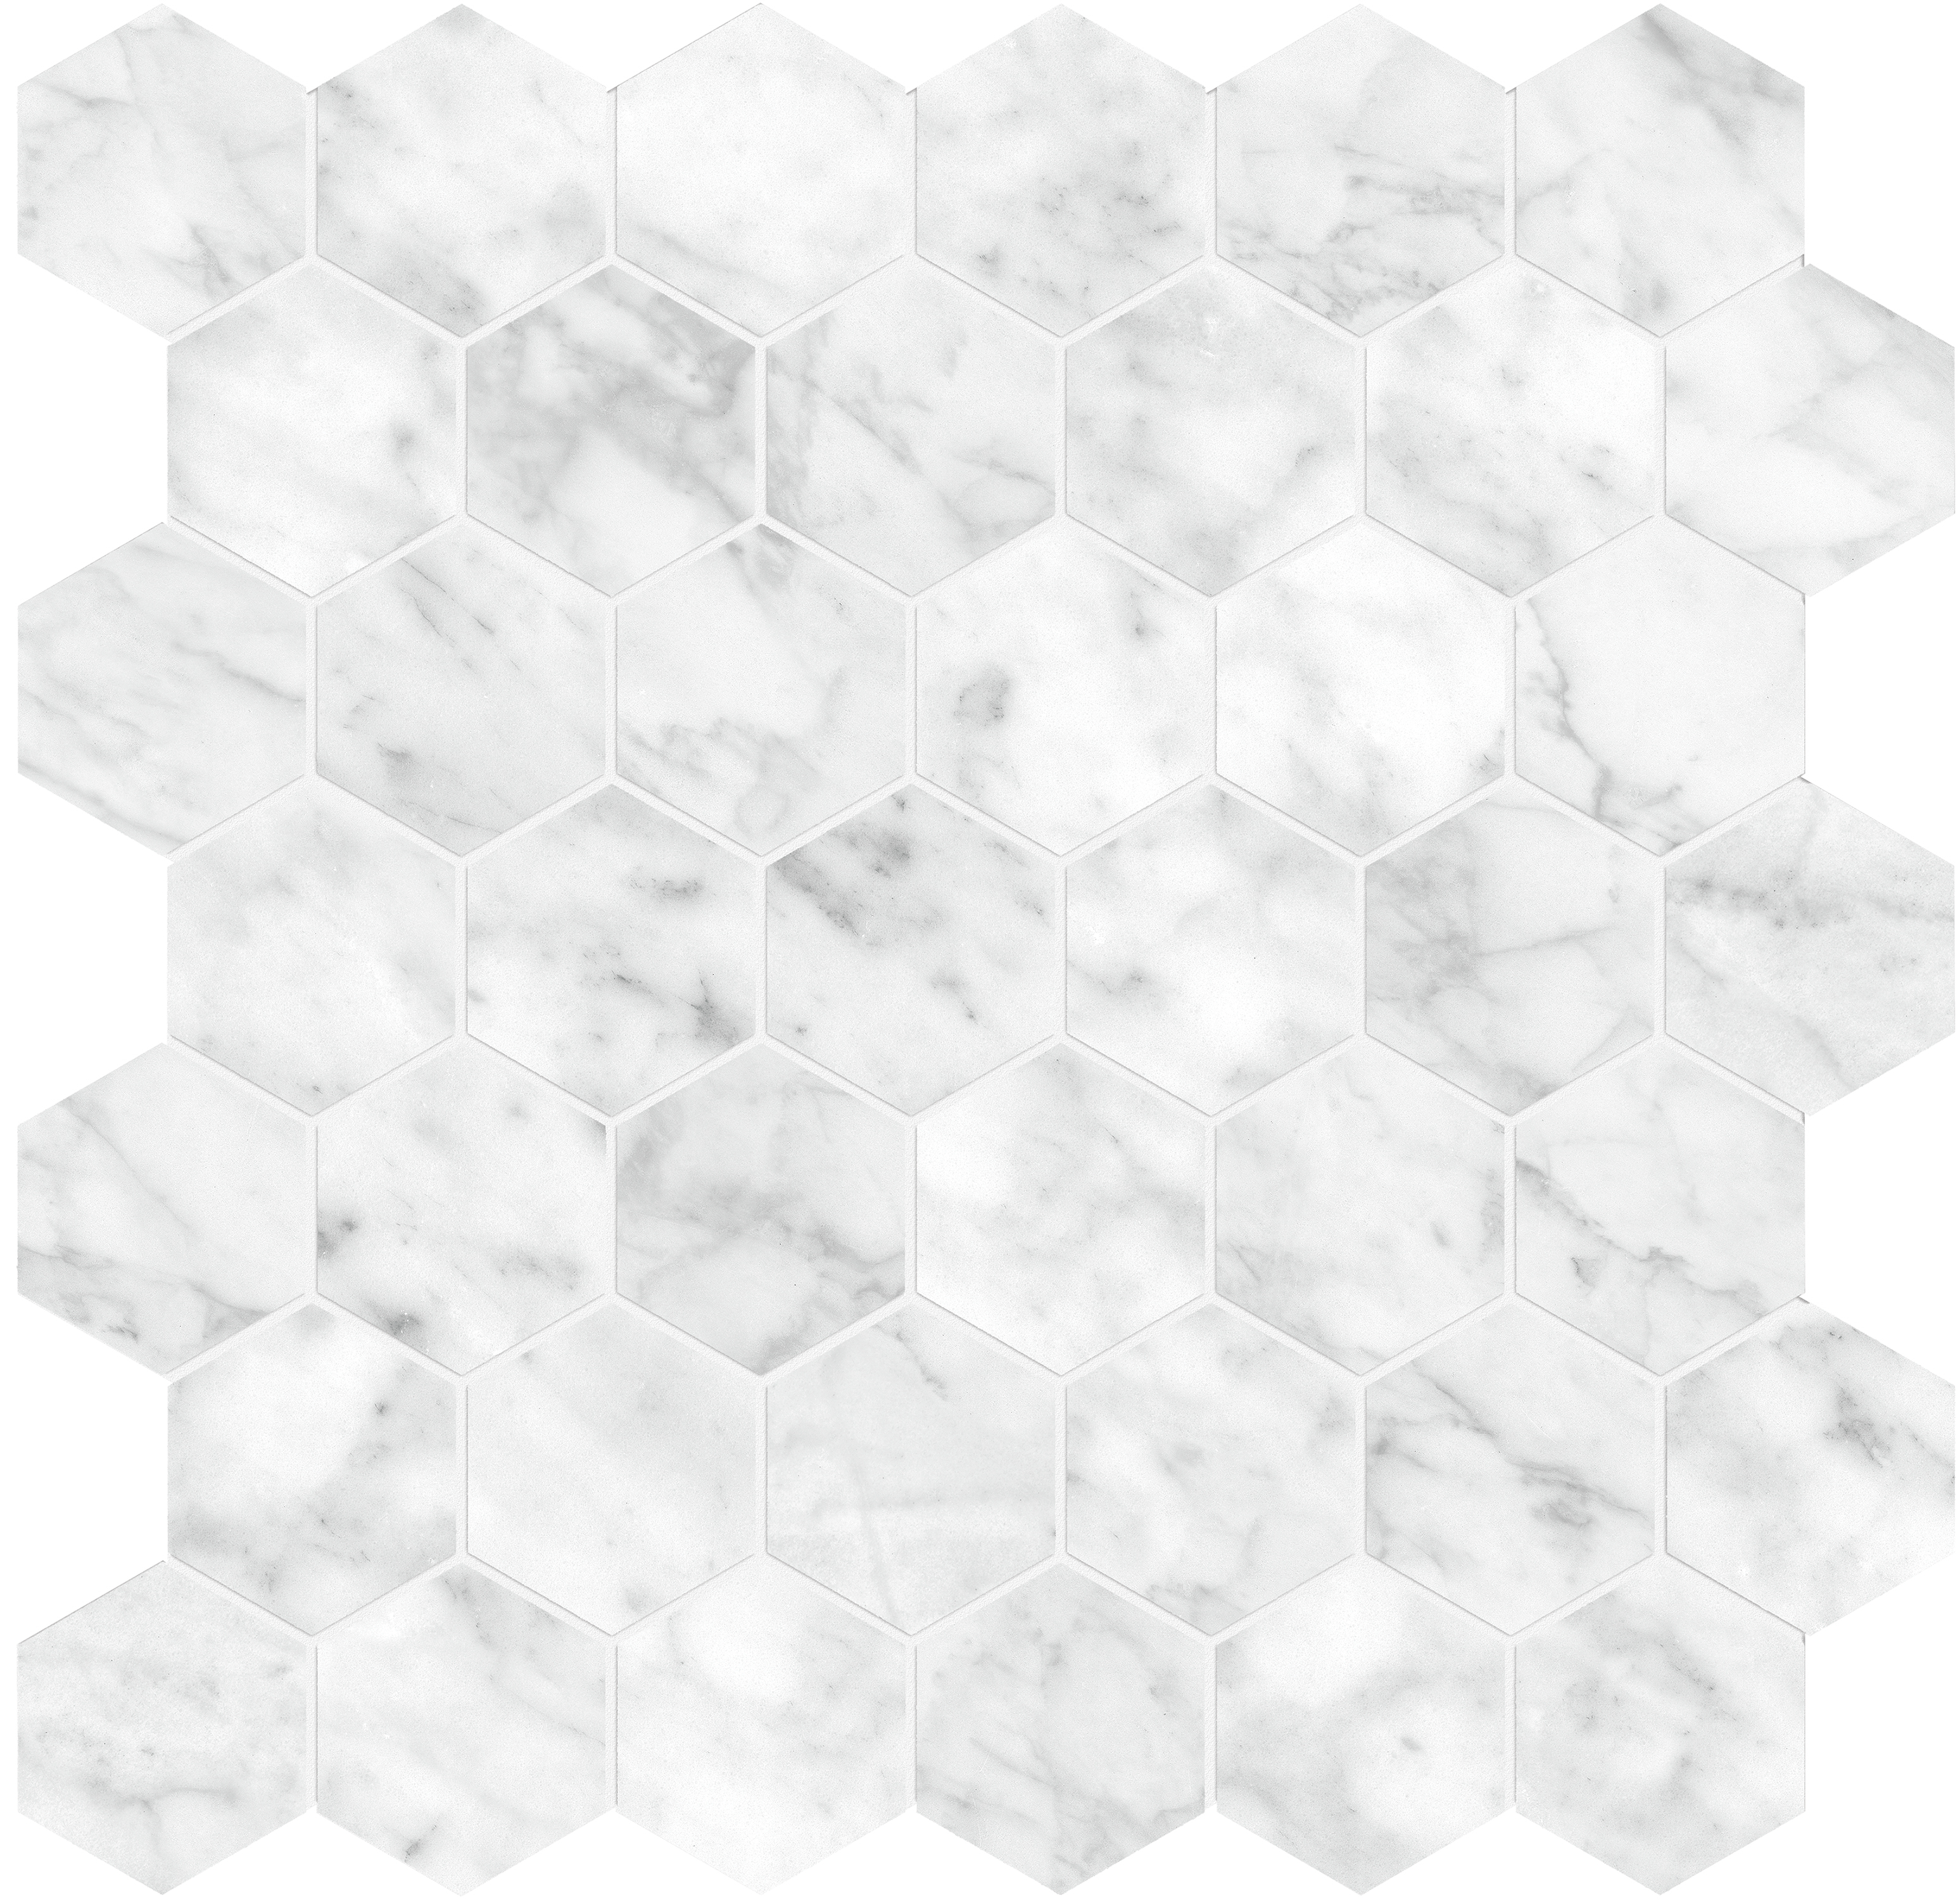 carrara gioia hexagon 2-inch pattern glazed porcelain mosaic from la marca anatolia collection distributed by surface group international honed finish straight edge edge mesh shape